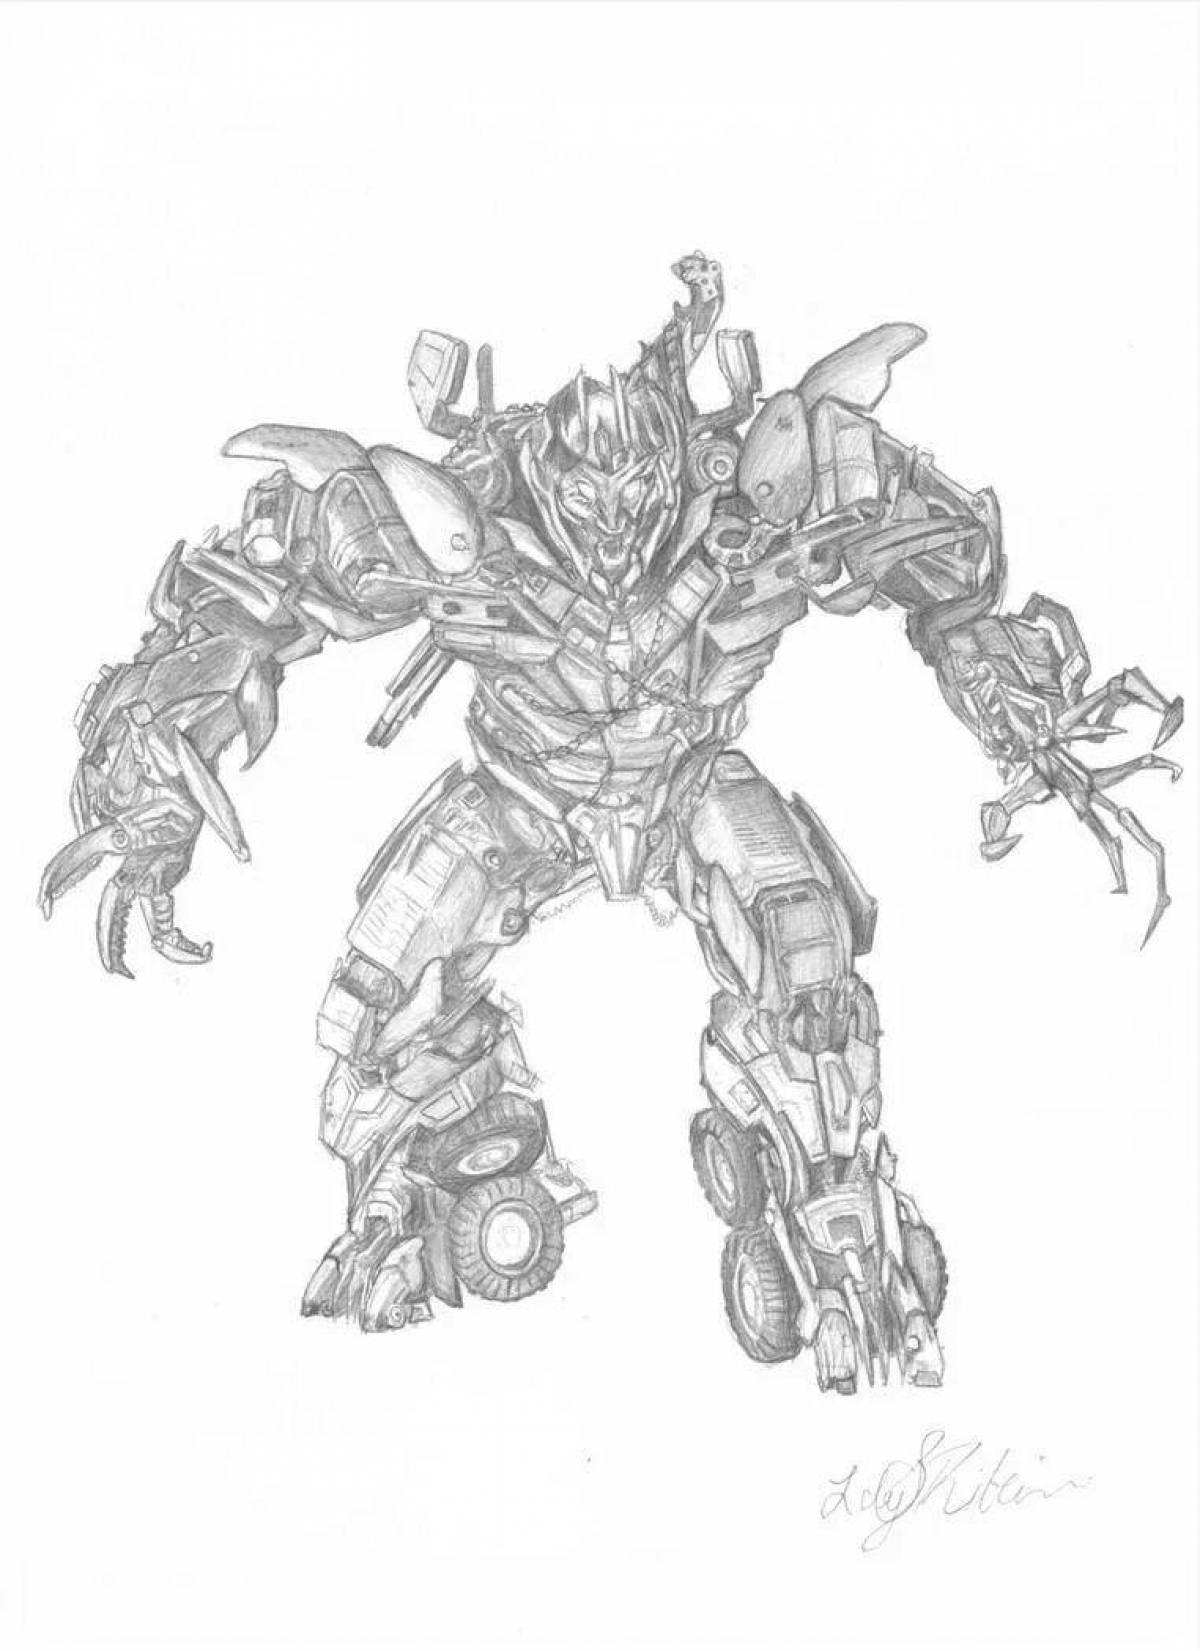 Megatron awesome coloring book